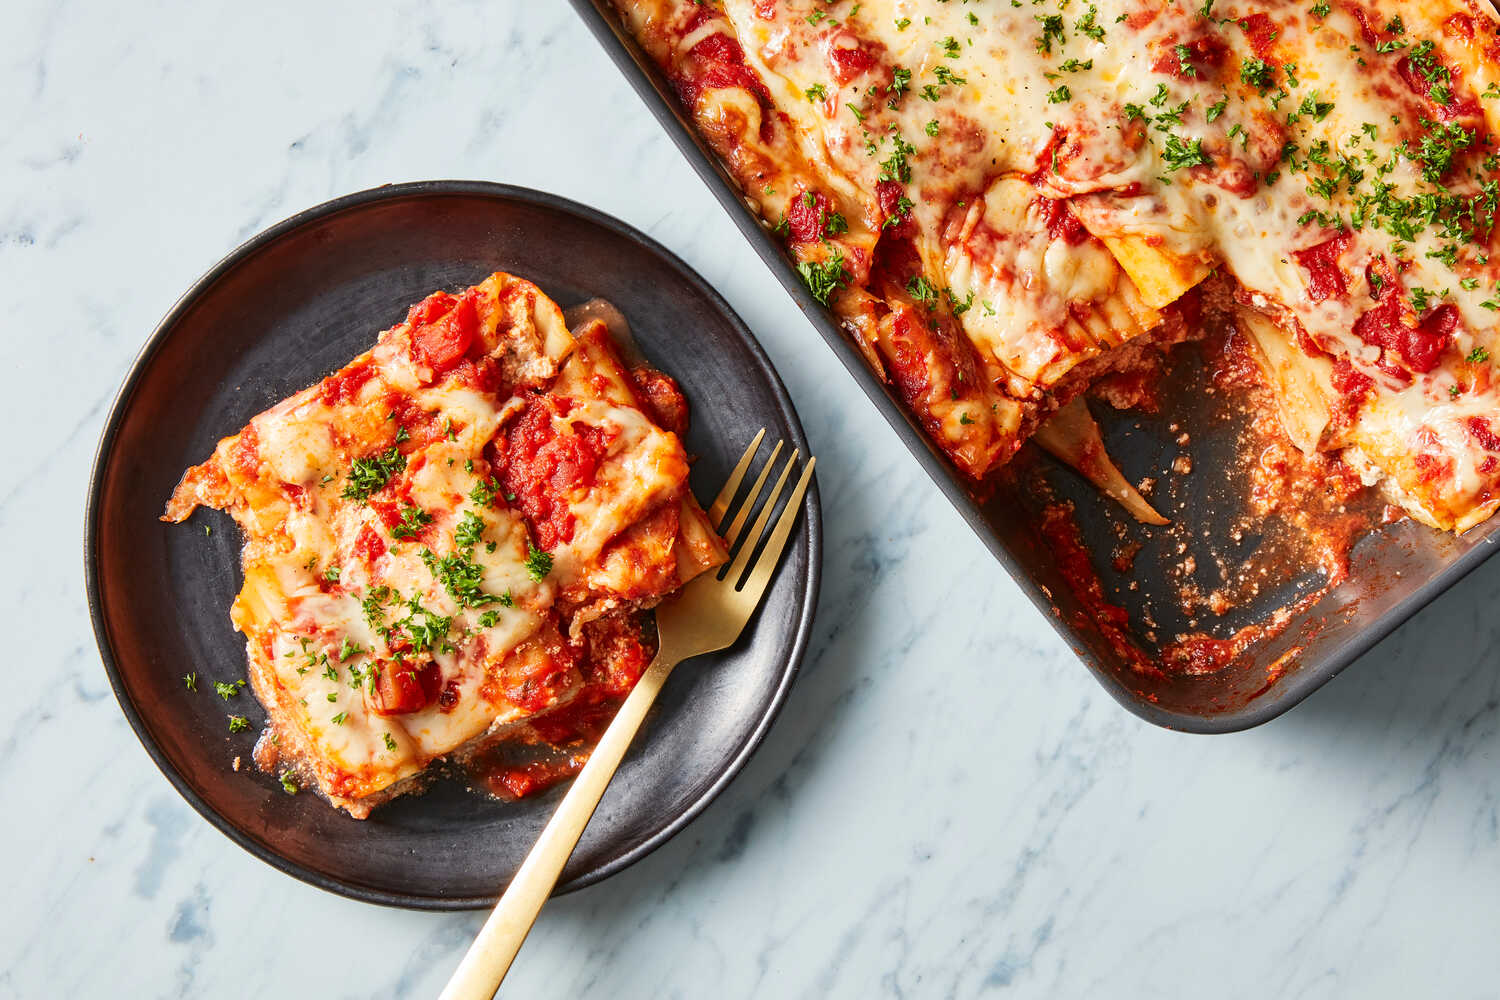 How to Make Stuffed Manicotti in the Instant Pot